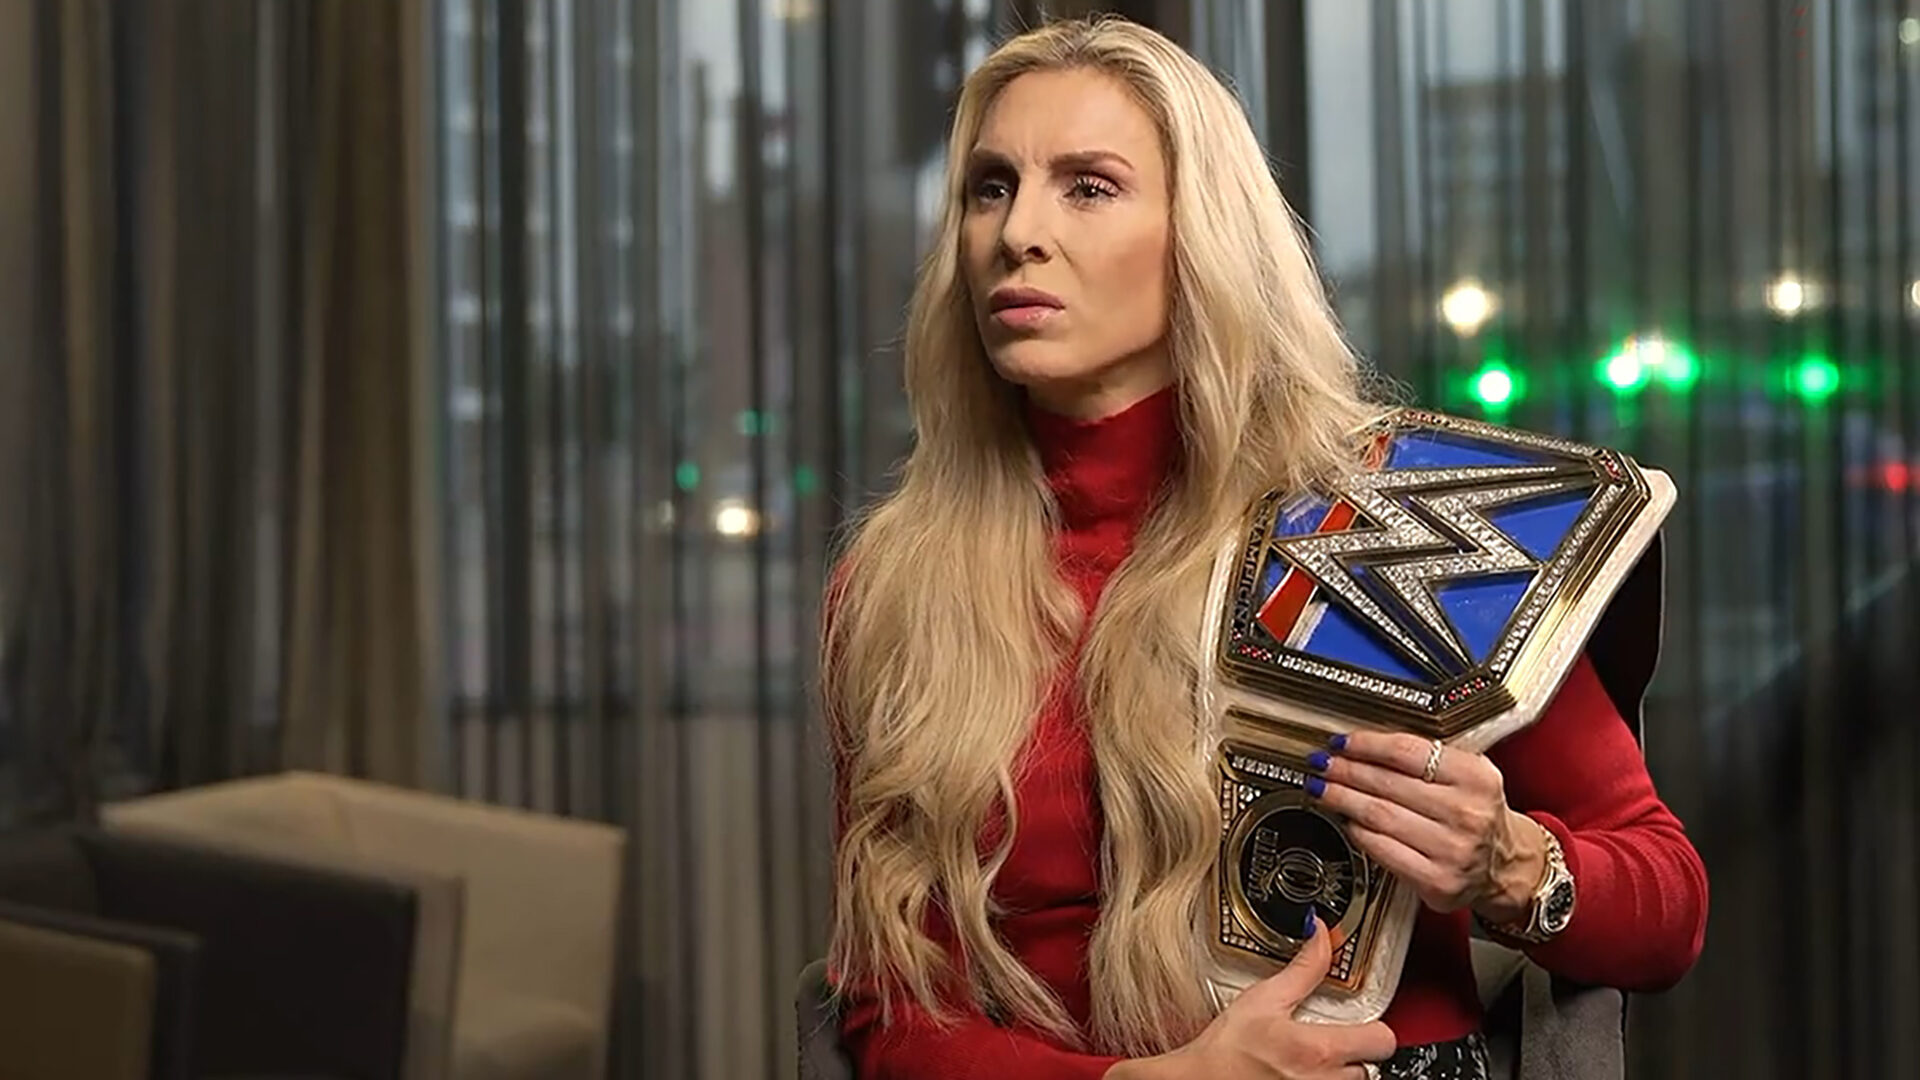 Charlotte Flair Responds To Criticism About She's Difficult To Work With